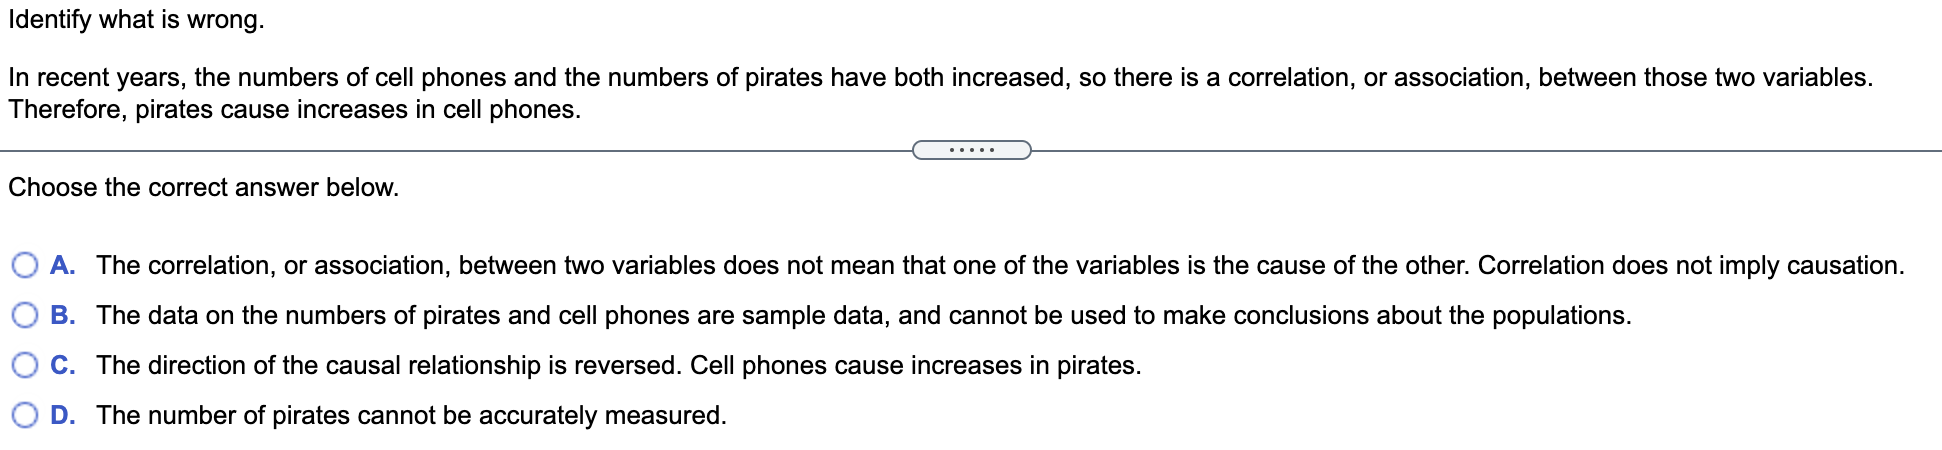 Identify What Is Wrong In Recent Years The Numbers Of Cell Phones And The Numbers Of Pirates Have Both Increased So T 1